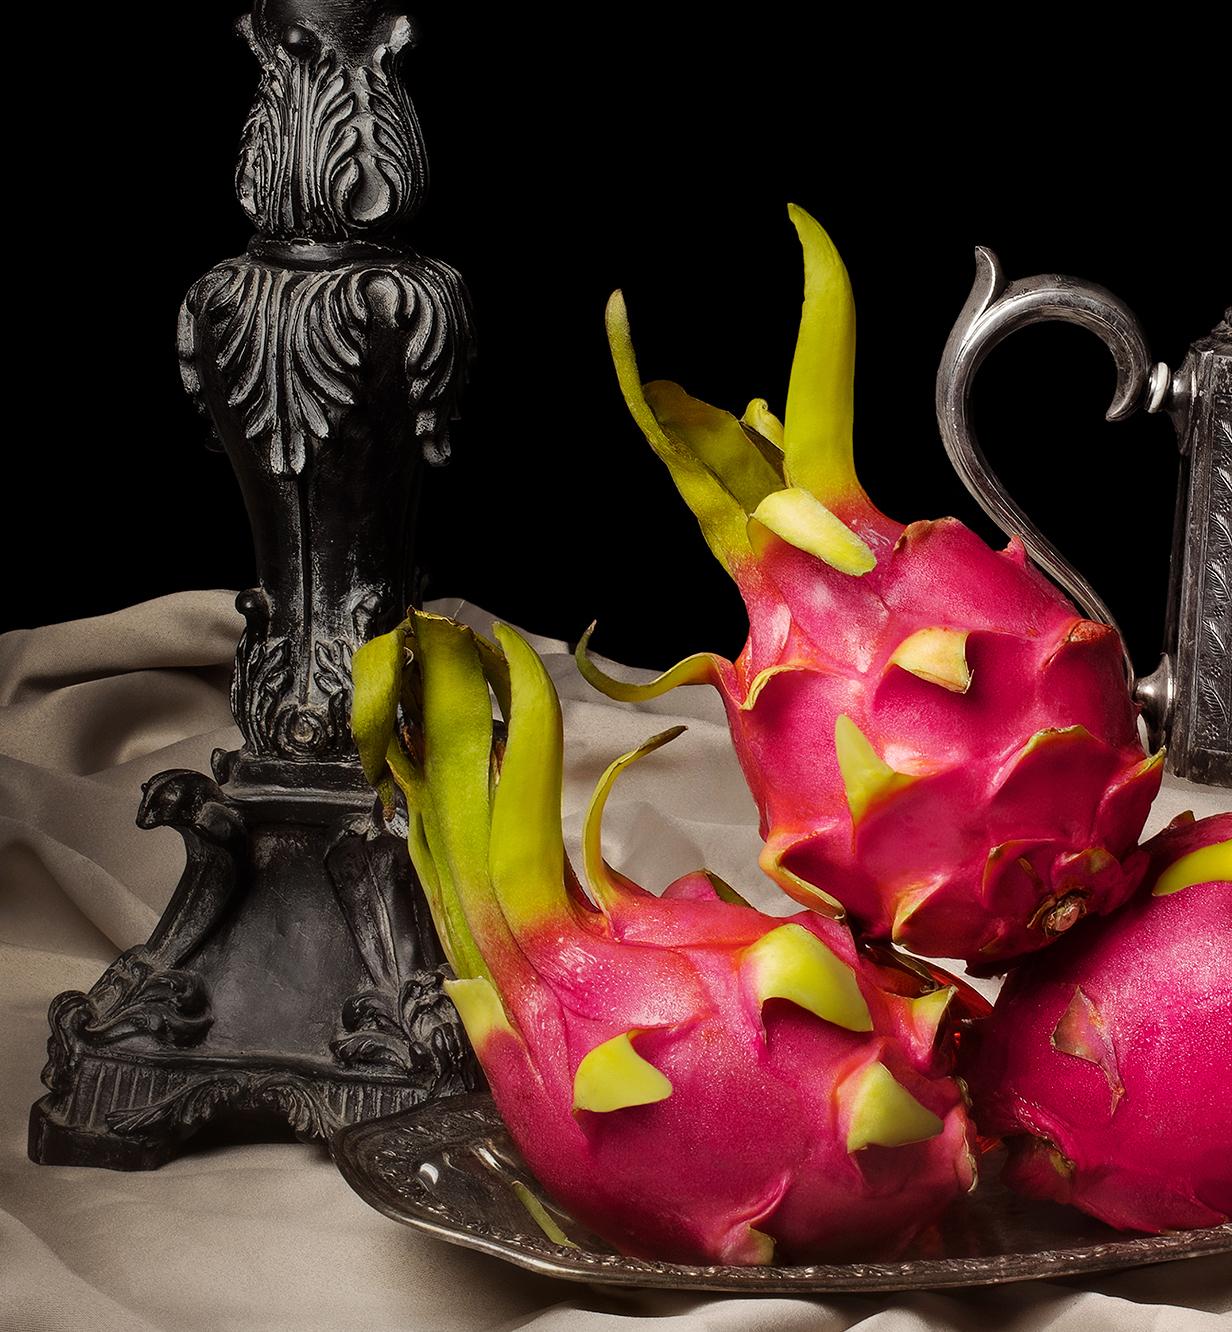 Pitayas. From The  Bodegones still life color photography  Series - Photograph by Dora Franco